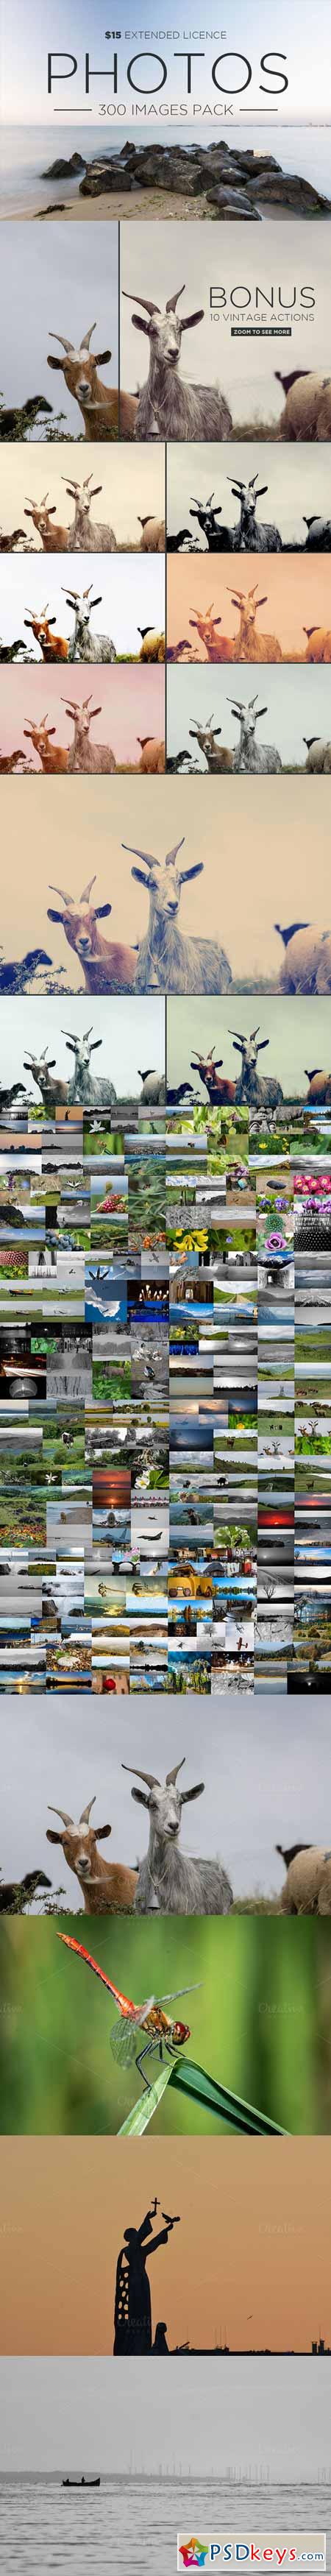 300 Images Pack Extended Licence 367602